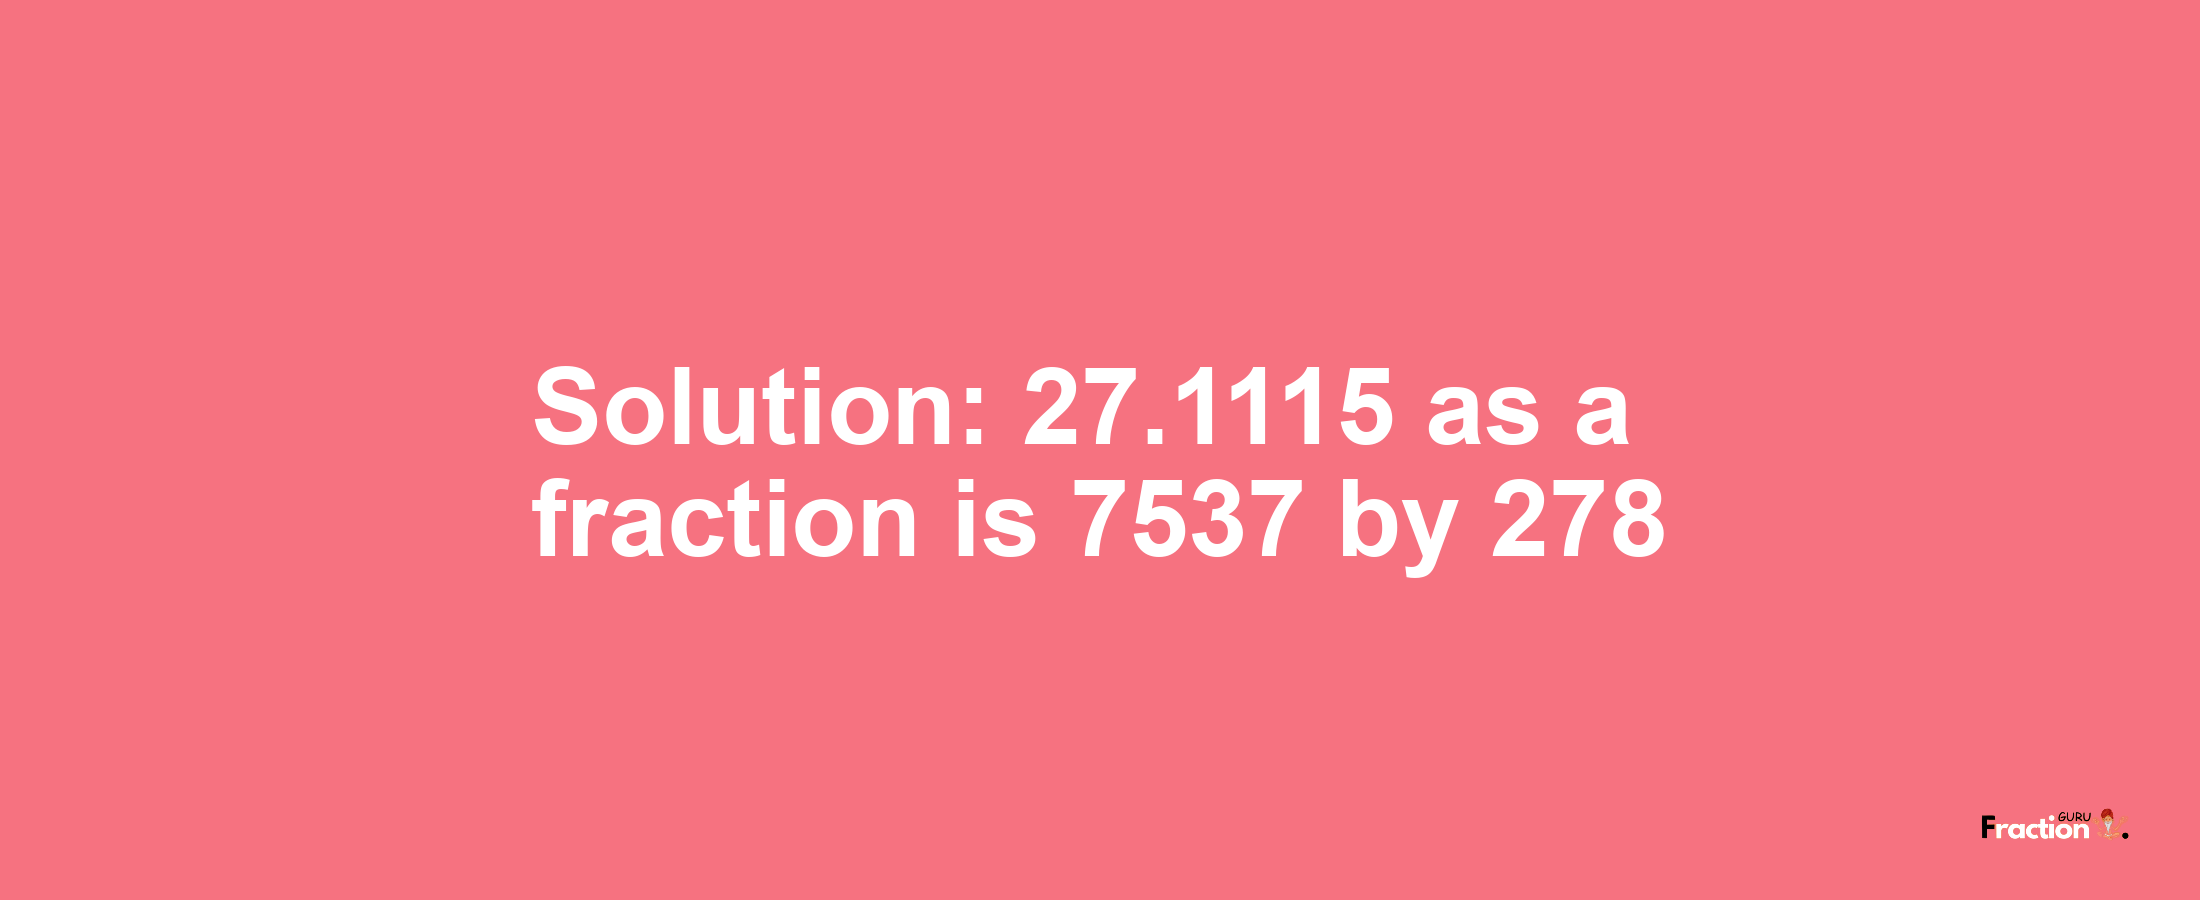 Solution:27.1115 as a fraction is 7537/278